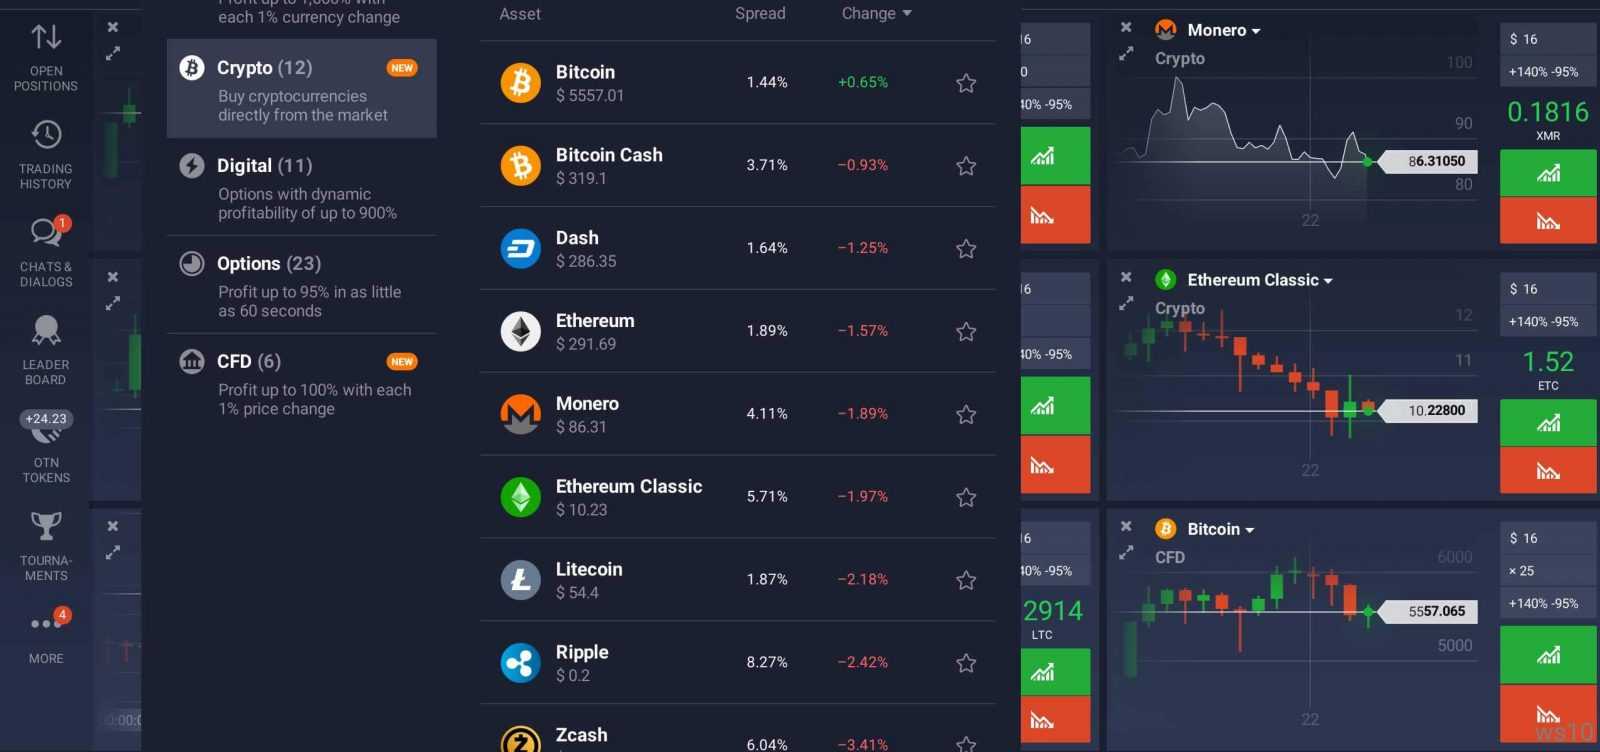 How to trade cryptocurrency on iq option cryptocurrency bitcoin disruption challenges and opportunities